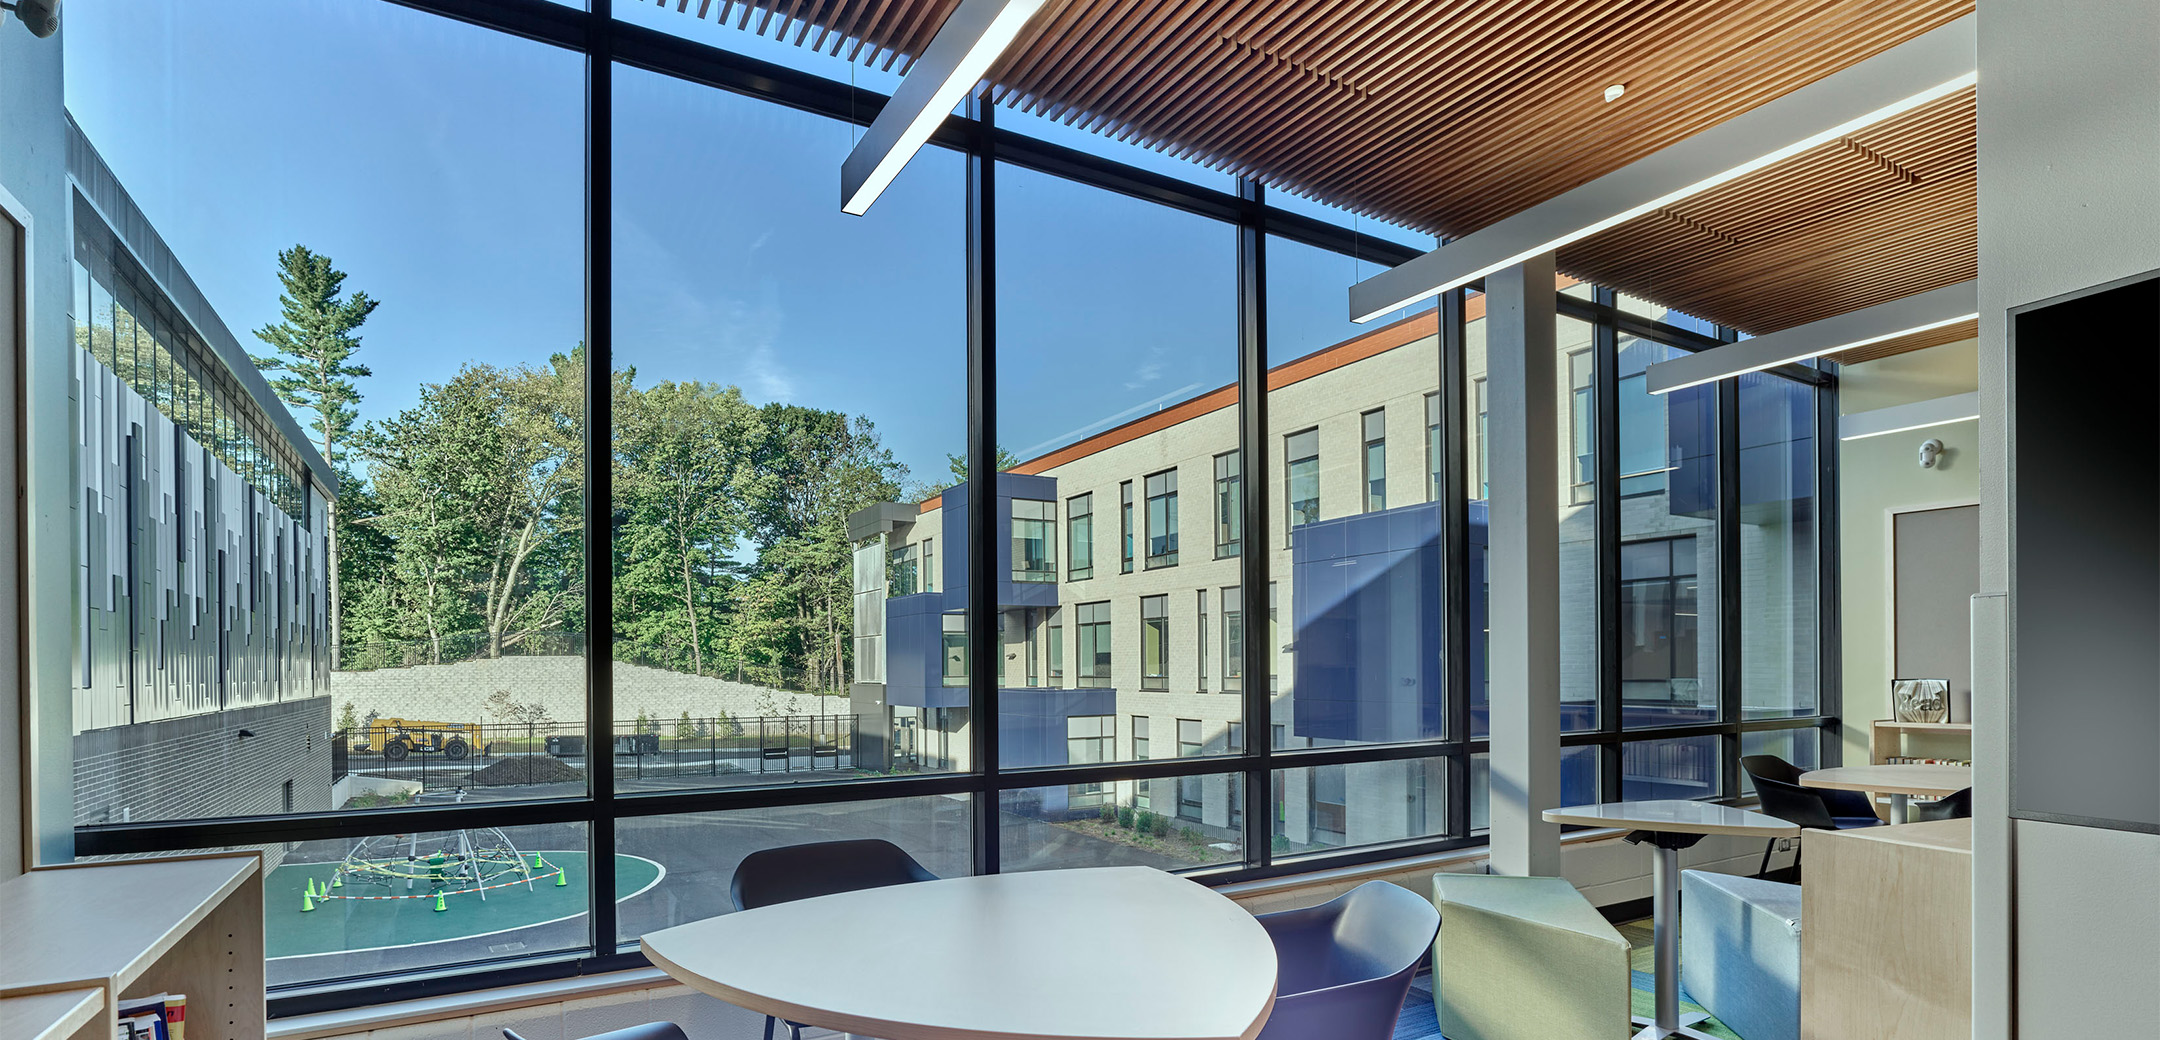 The interior of Black Rock Middle School featuring a large window showing the outside playground